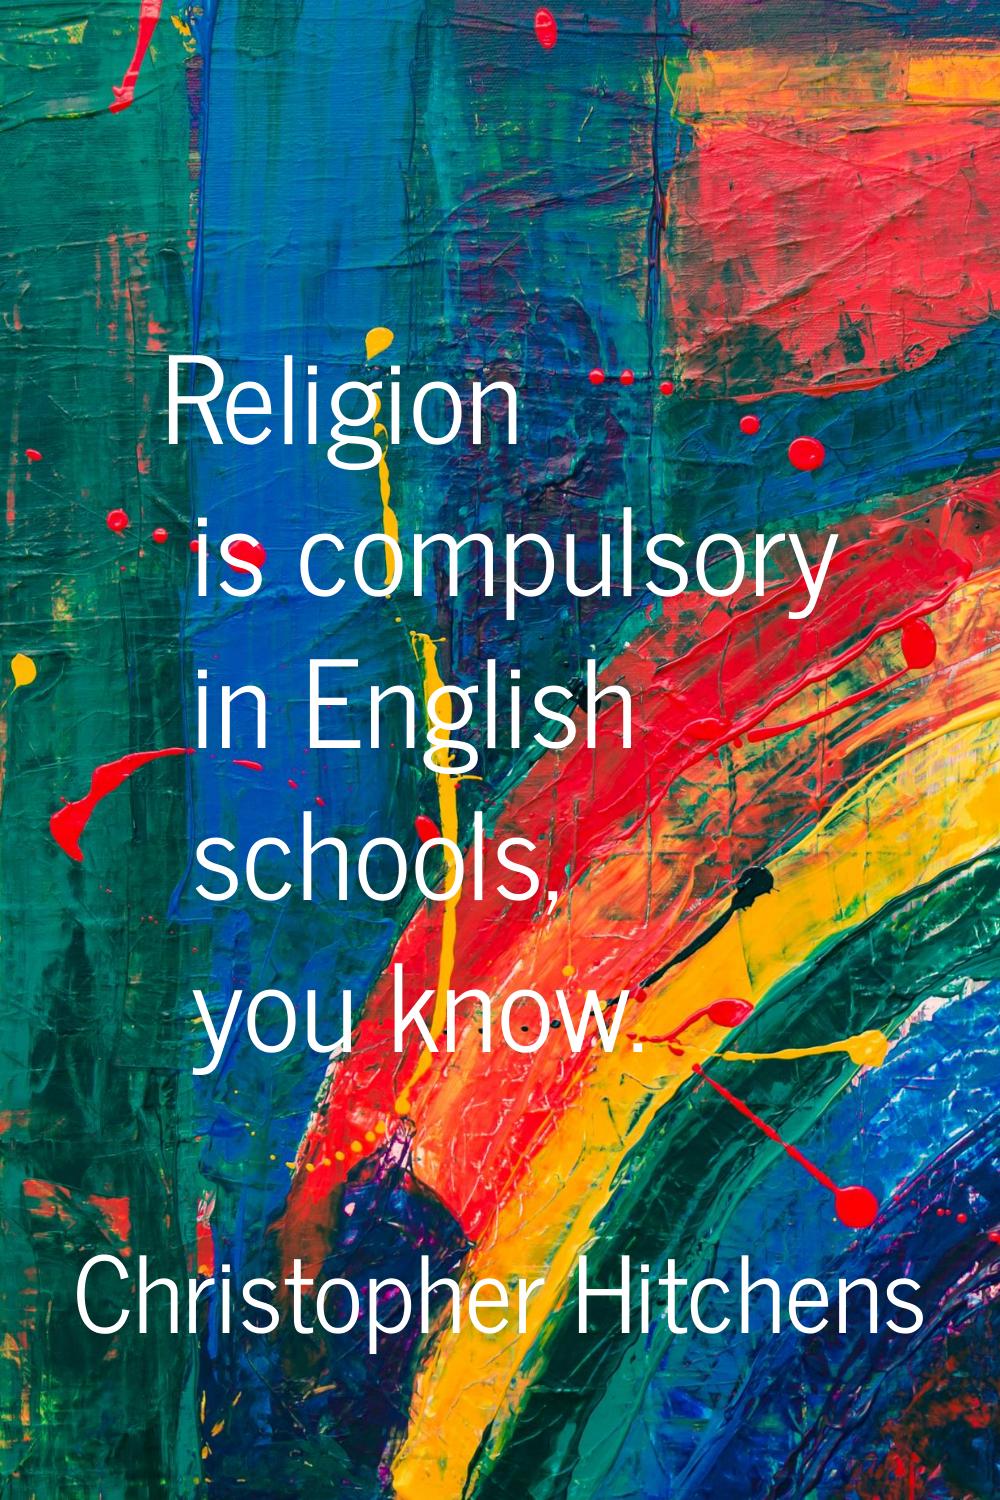 Religion is compulsory in English schools, you know.